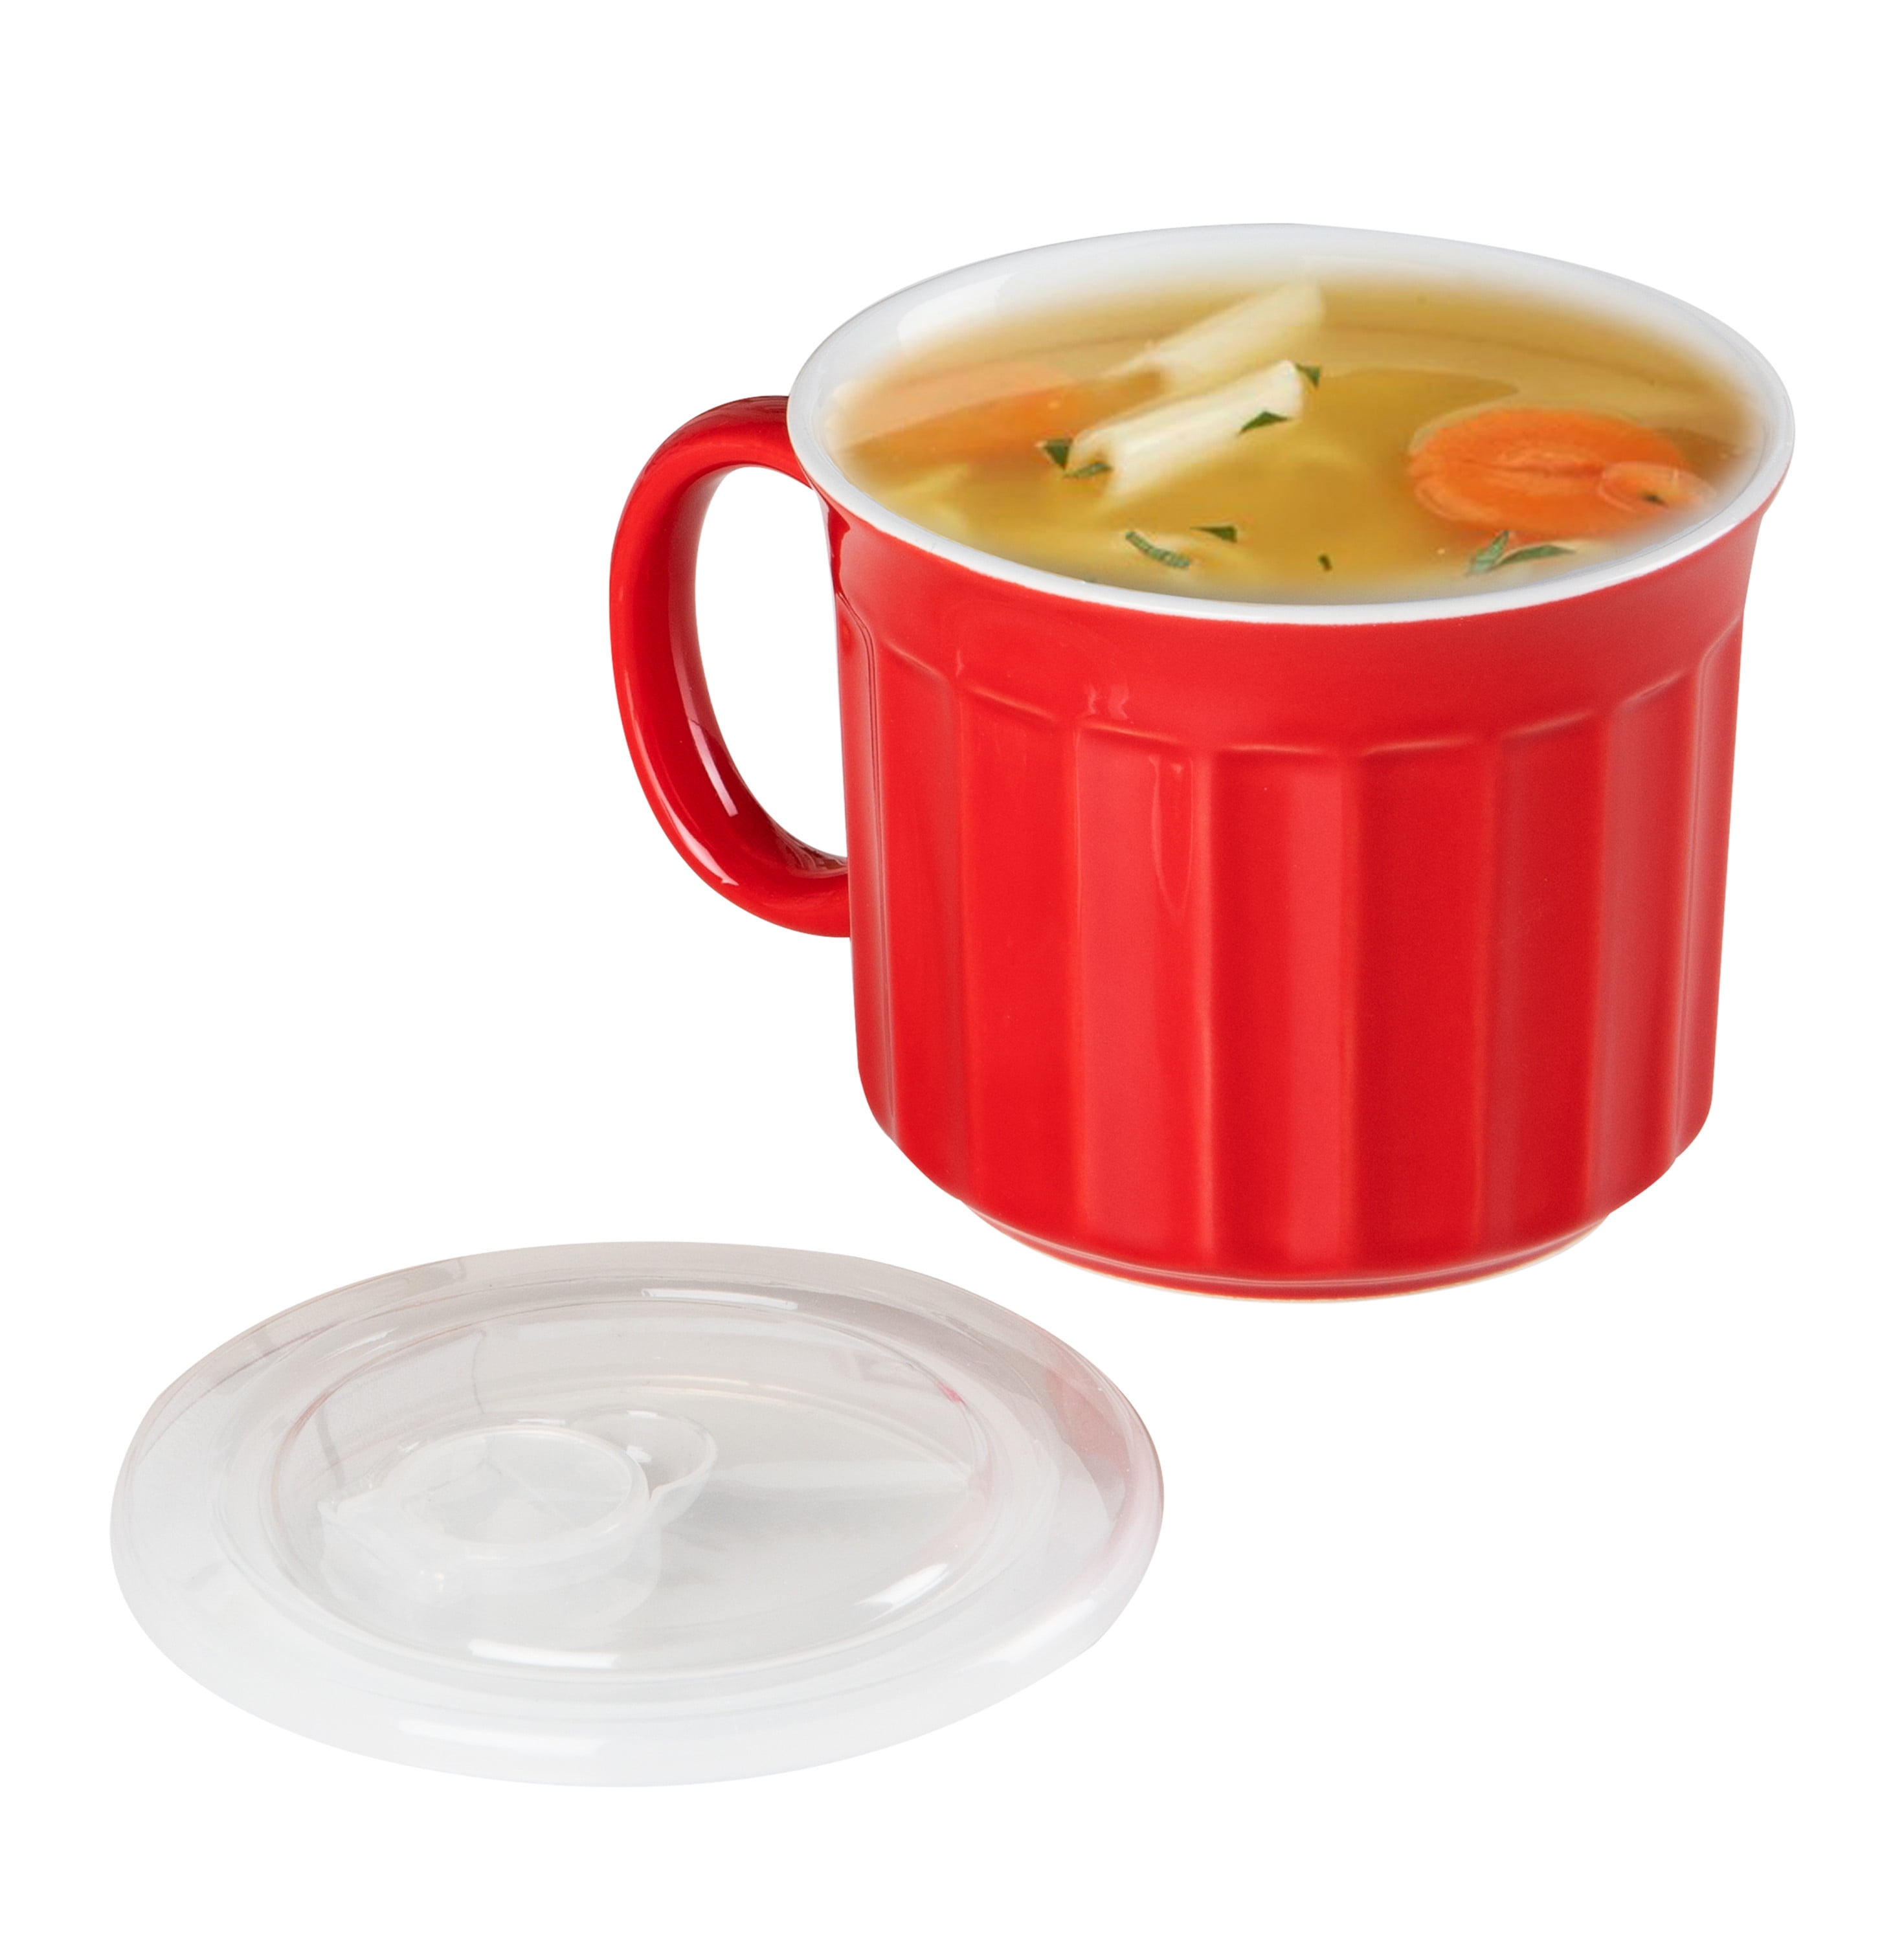 22 oz Microwave Soup Mug with Vented Lid by Chefs Pride 